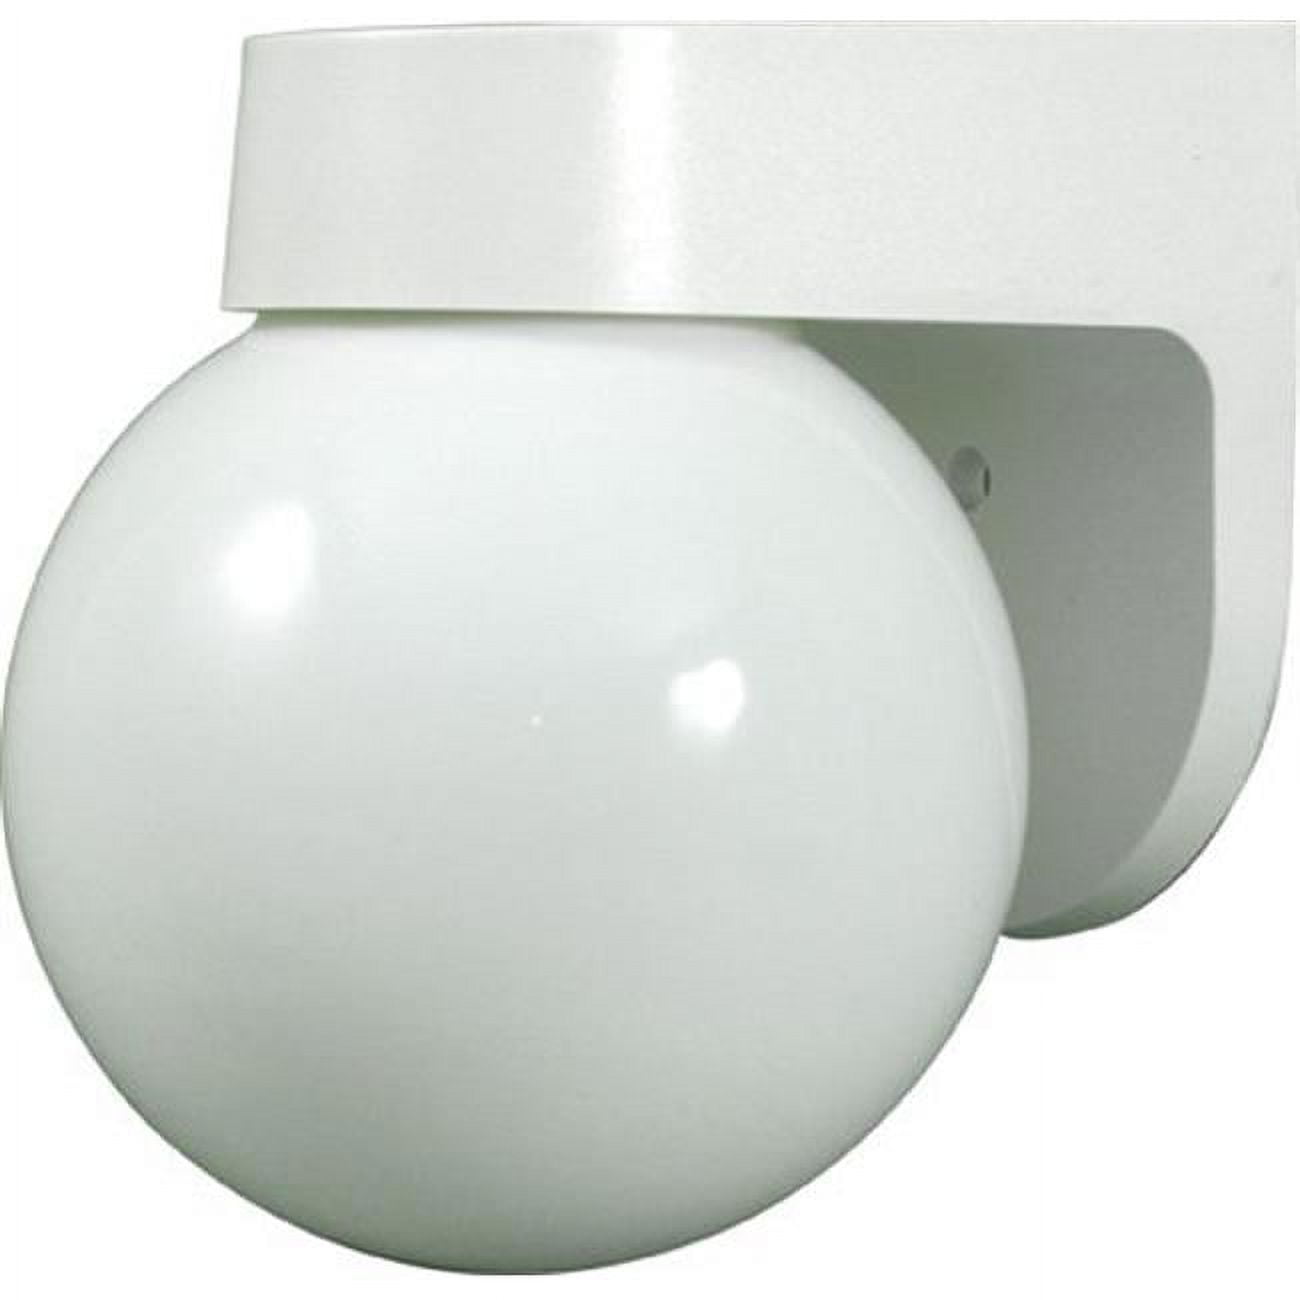 W2200-w 7.25 X 5.88 X 5.63 In. 120 V 60 Watts Incandenscent Type Polycarbonate Surface Mounted Wall Fixture Light, White